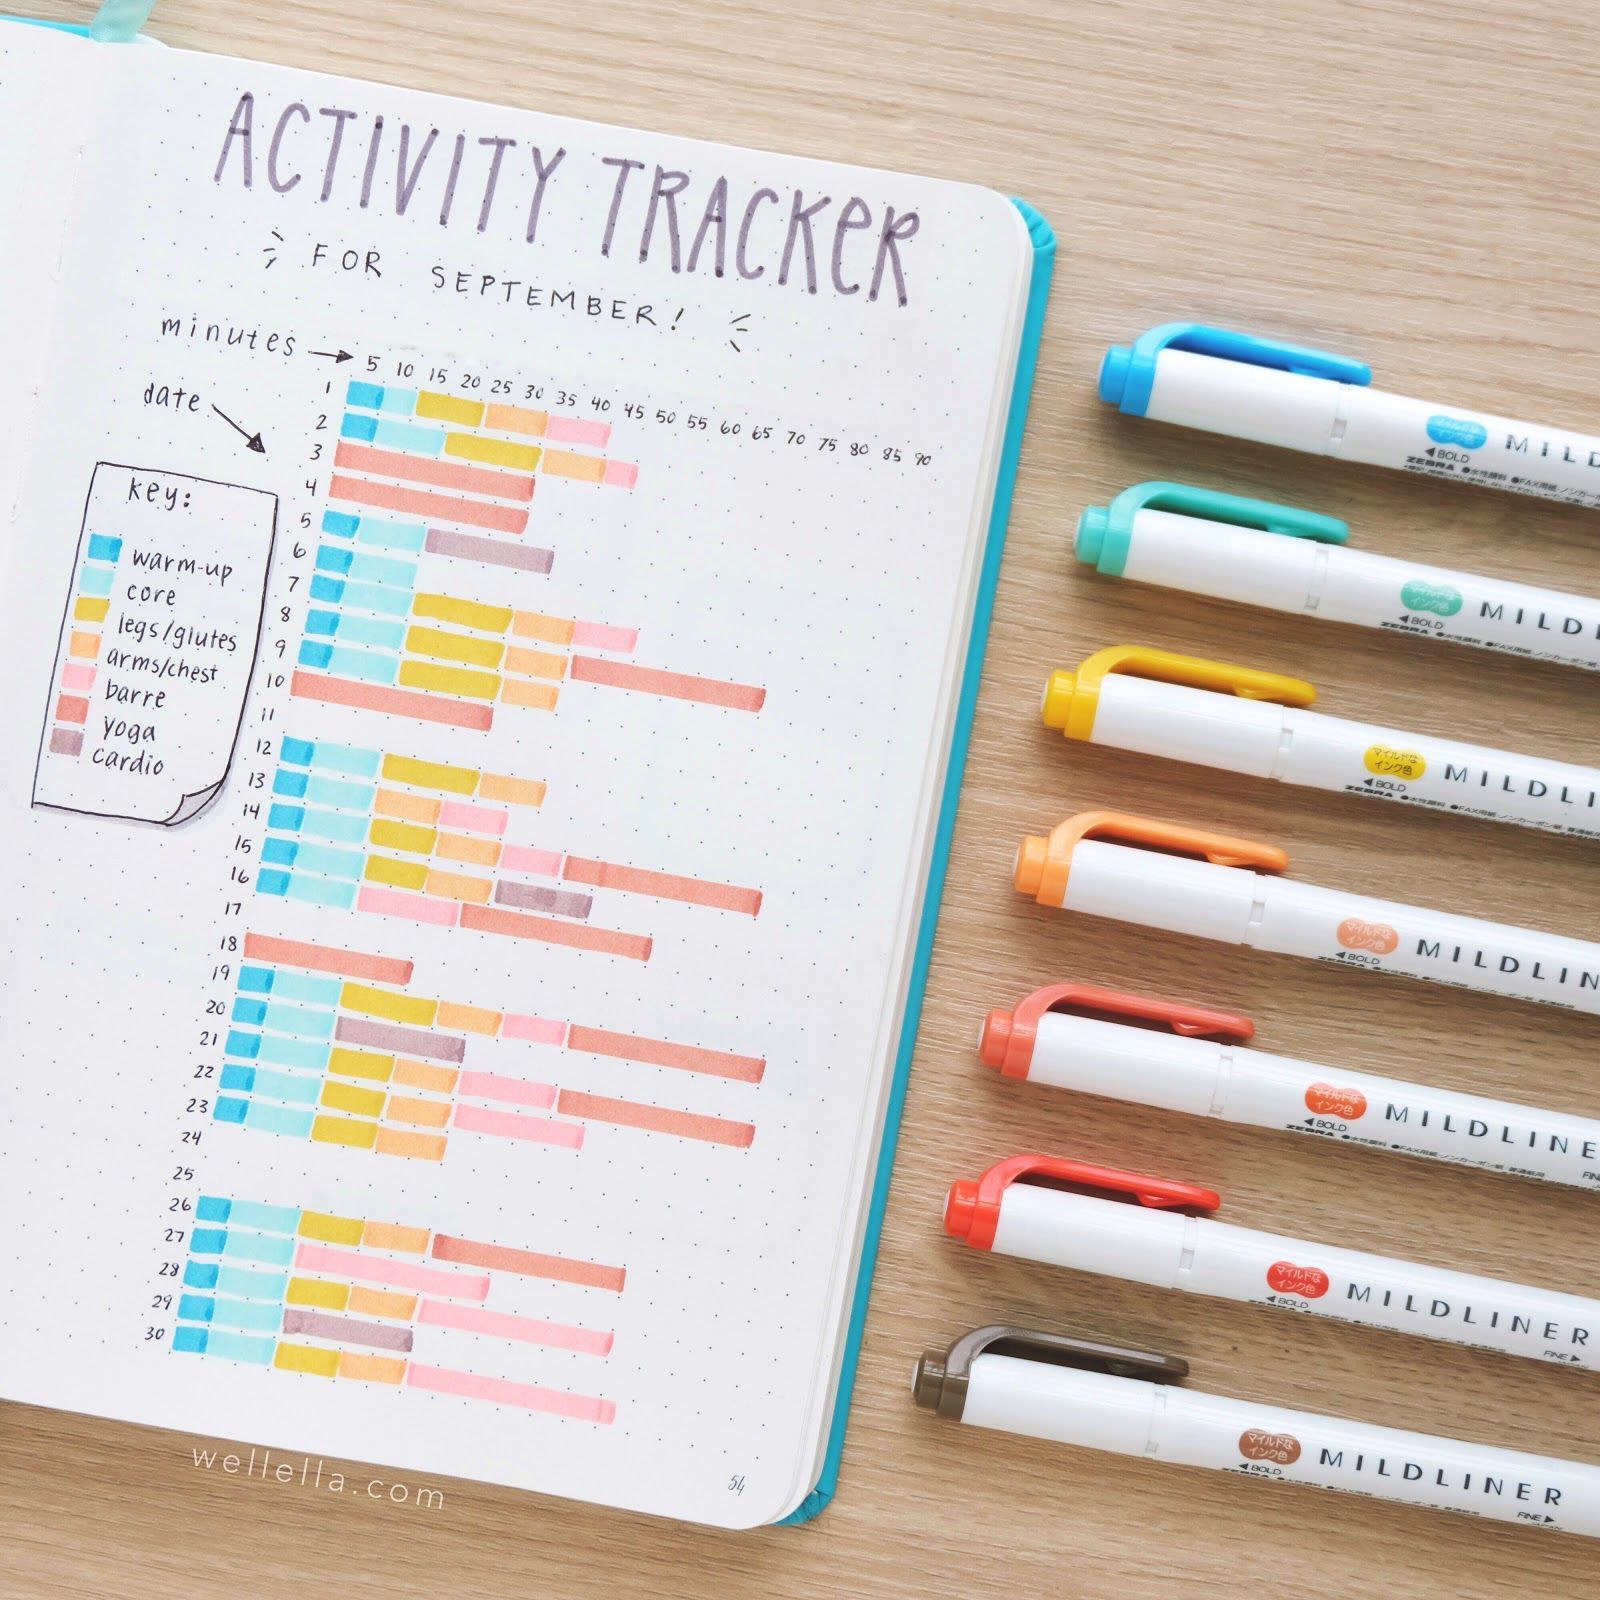 Bujo - Fitness Bullet Journal Page Ideas To Help You Track Your Exercise Goals In 2020 - Bujo - Fitness Bullet Journal Page Ideas To Help You Track Your Exercise Goals In 2020 -   16 fitness Journal monthly ideas